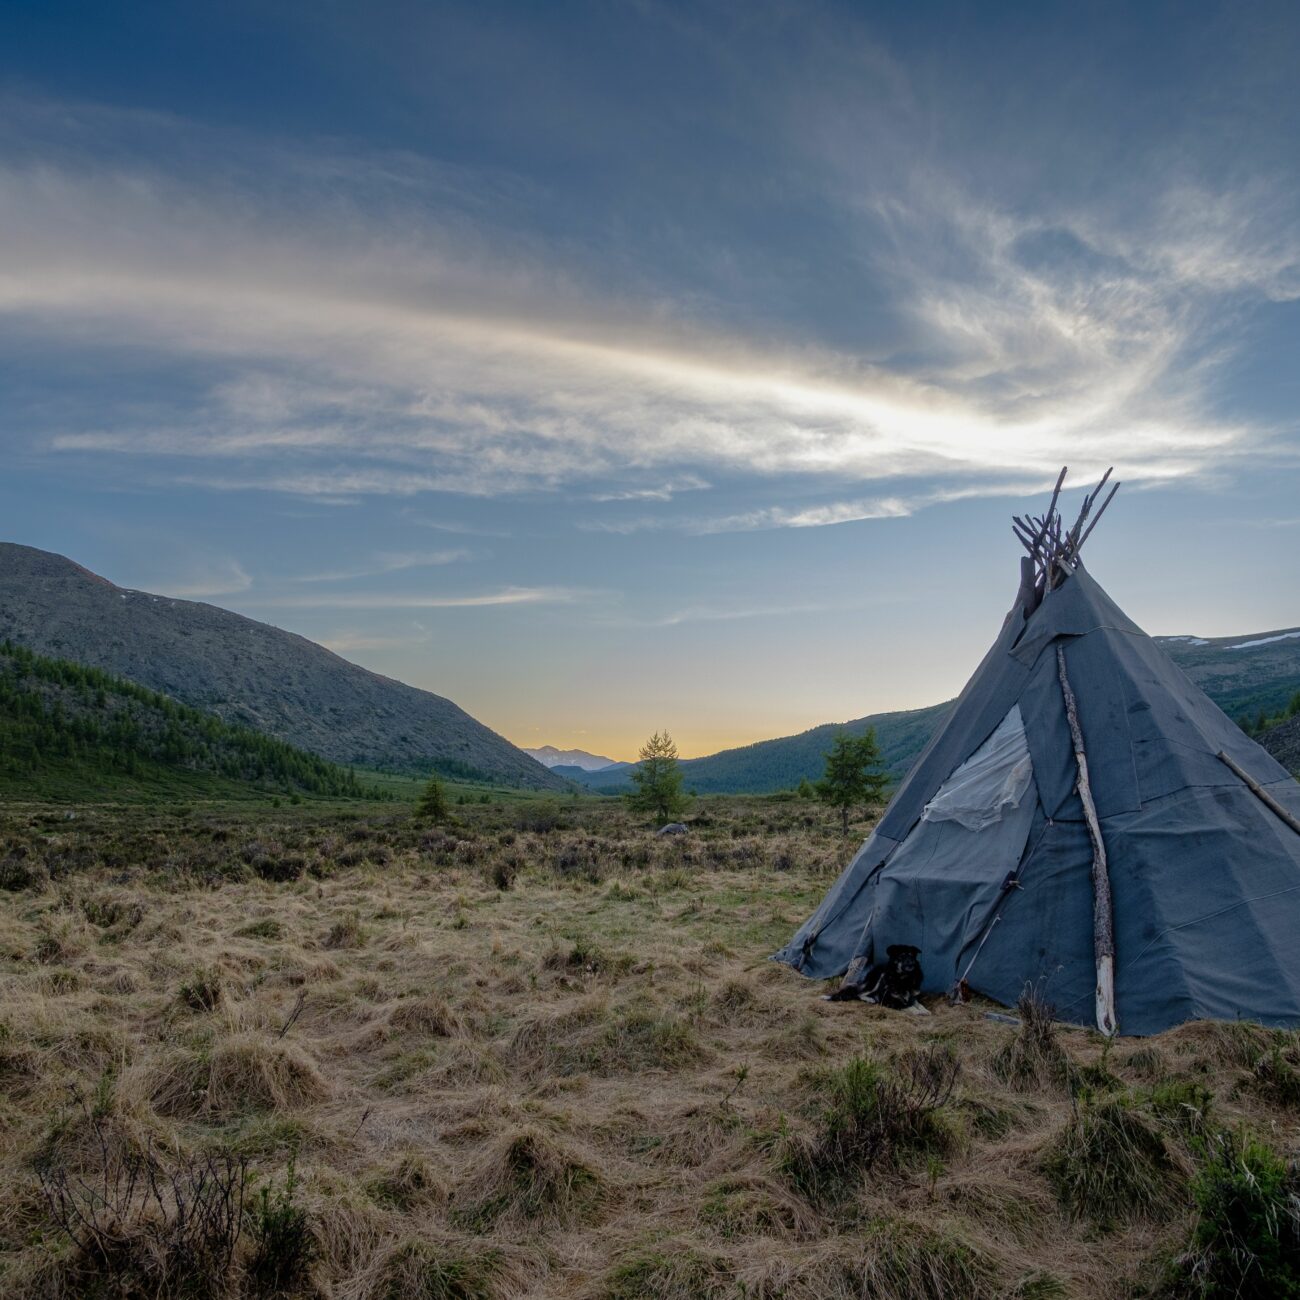 A blue nomadic tribe teepee on a rural field in Mongolia